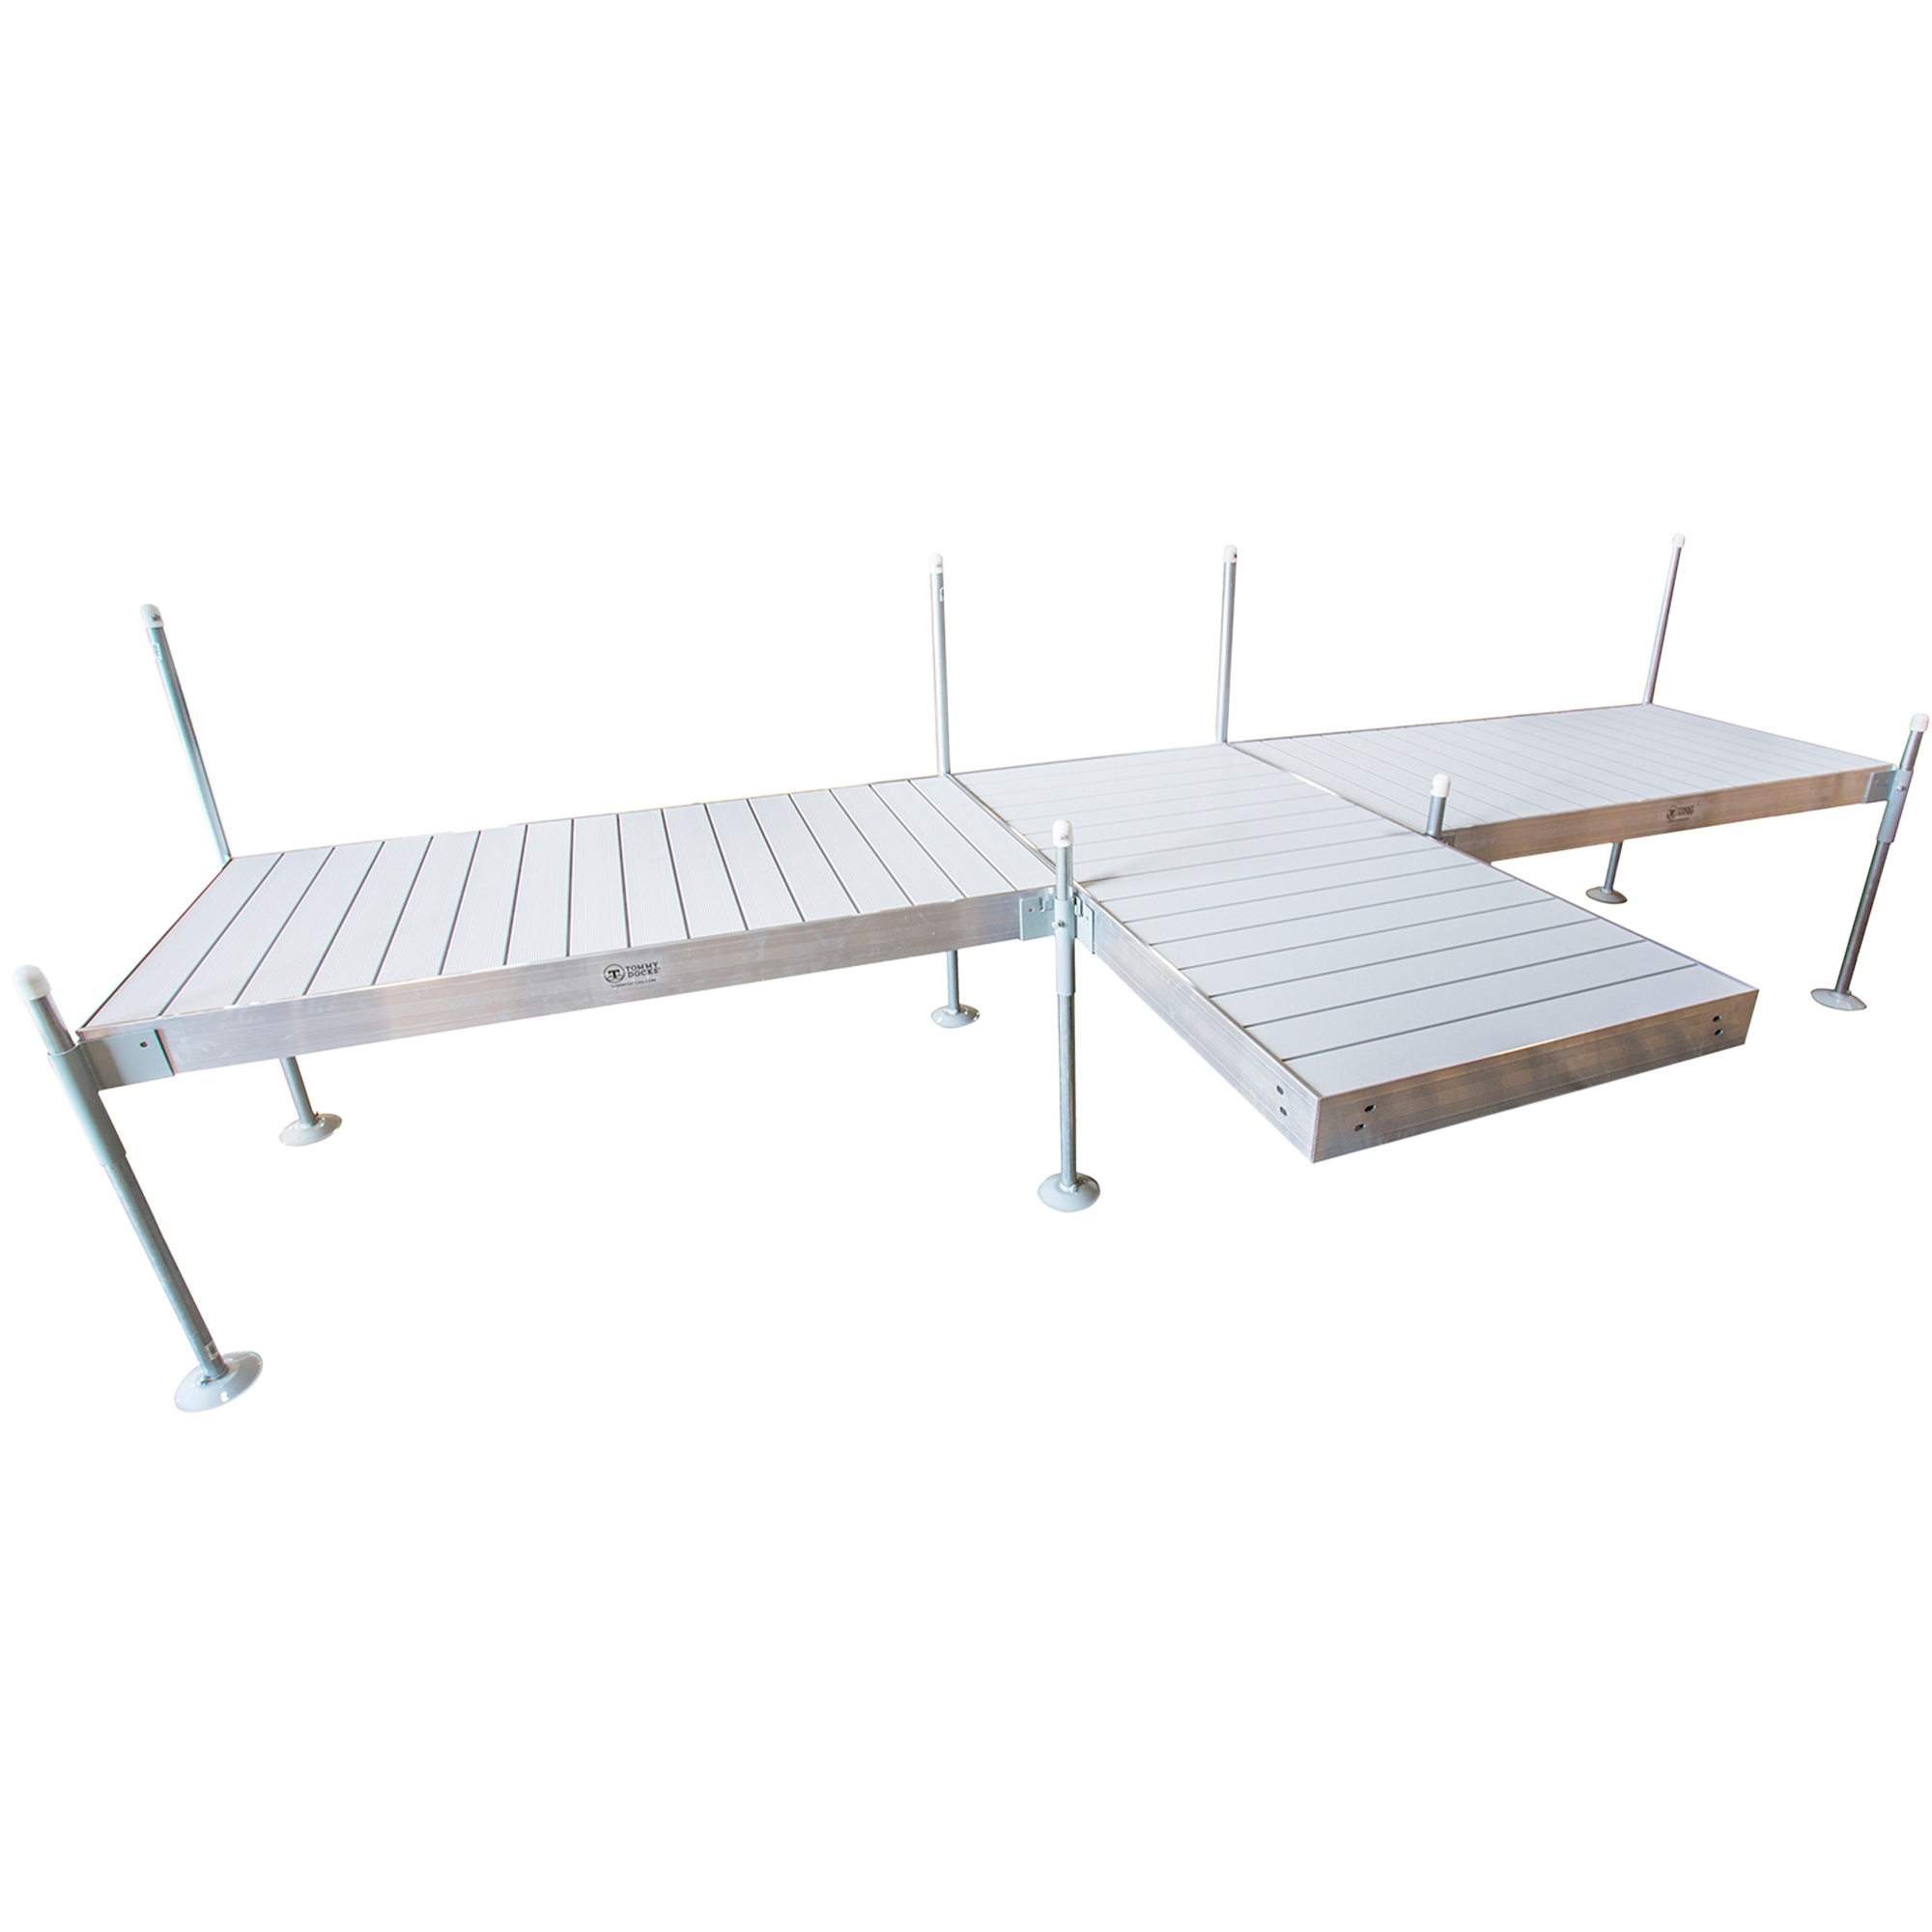 8’ Shore T-Shaped Boat Dock System with Aluminum Frame and Aluminum Decking